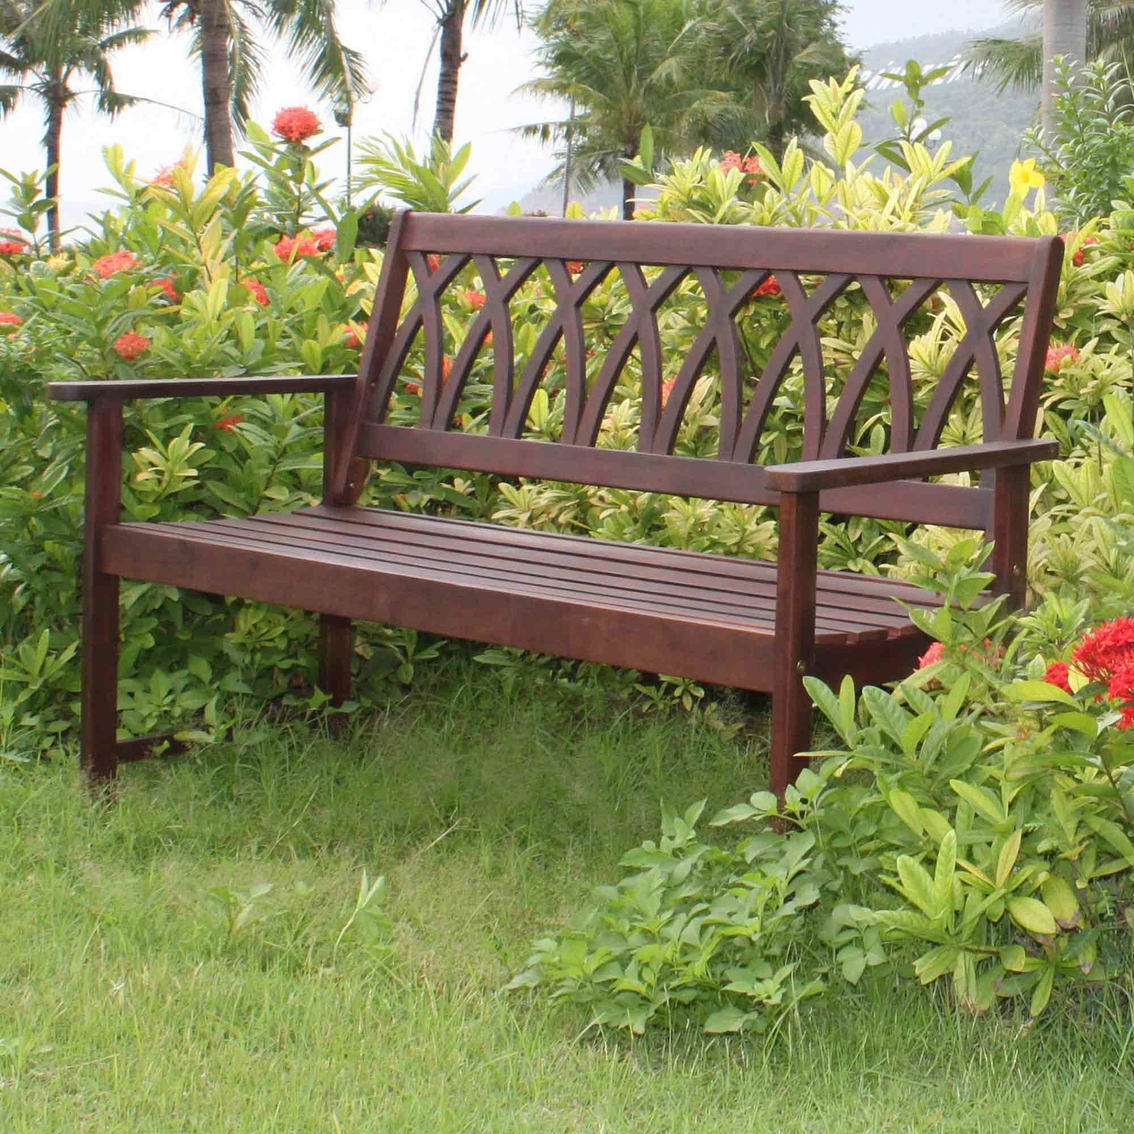 Merry Products Northbeam Criss Cross Garden Bench - Image 4 of 4